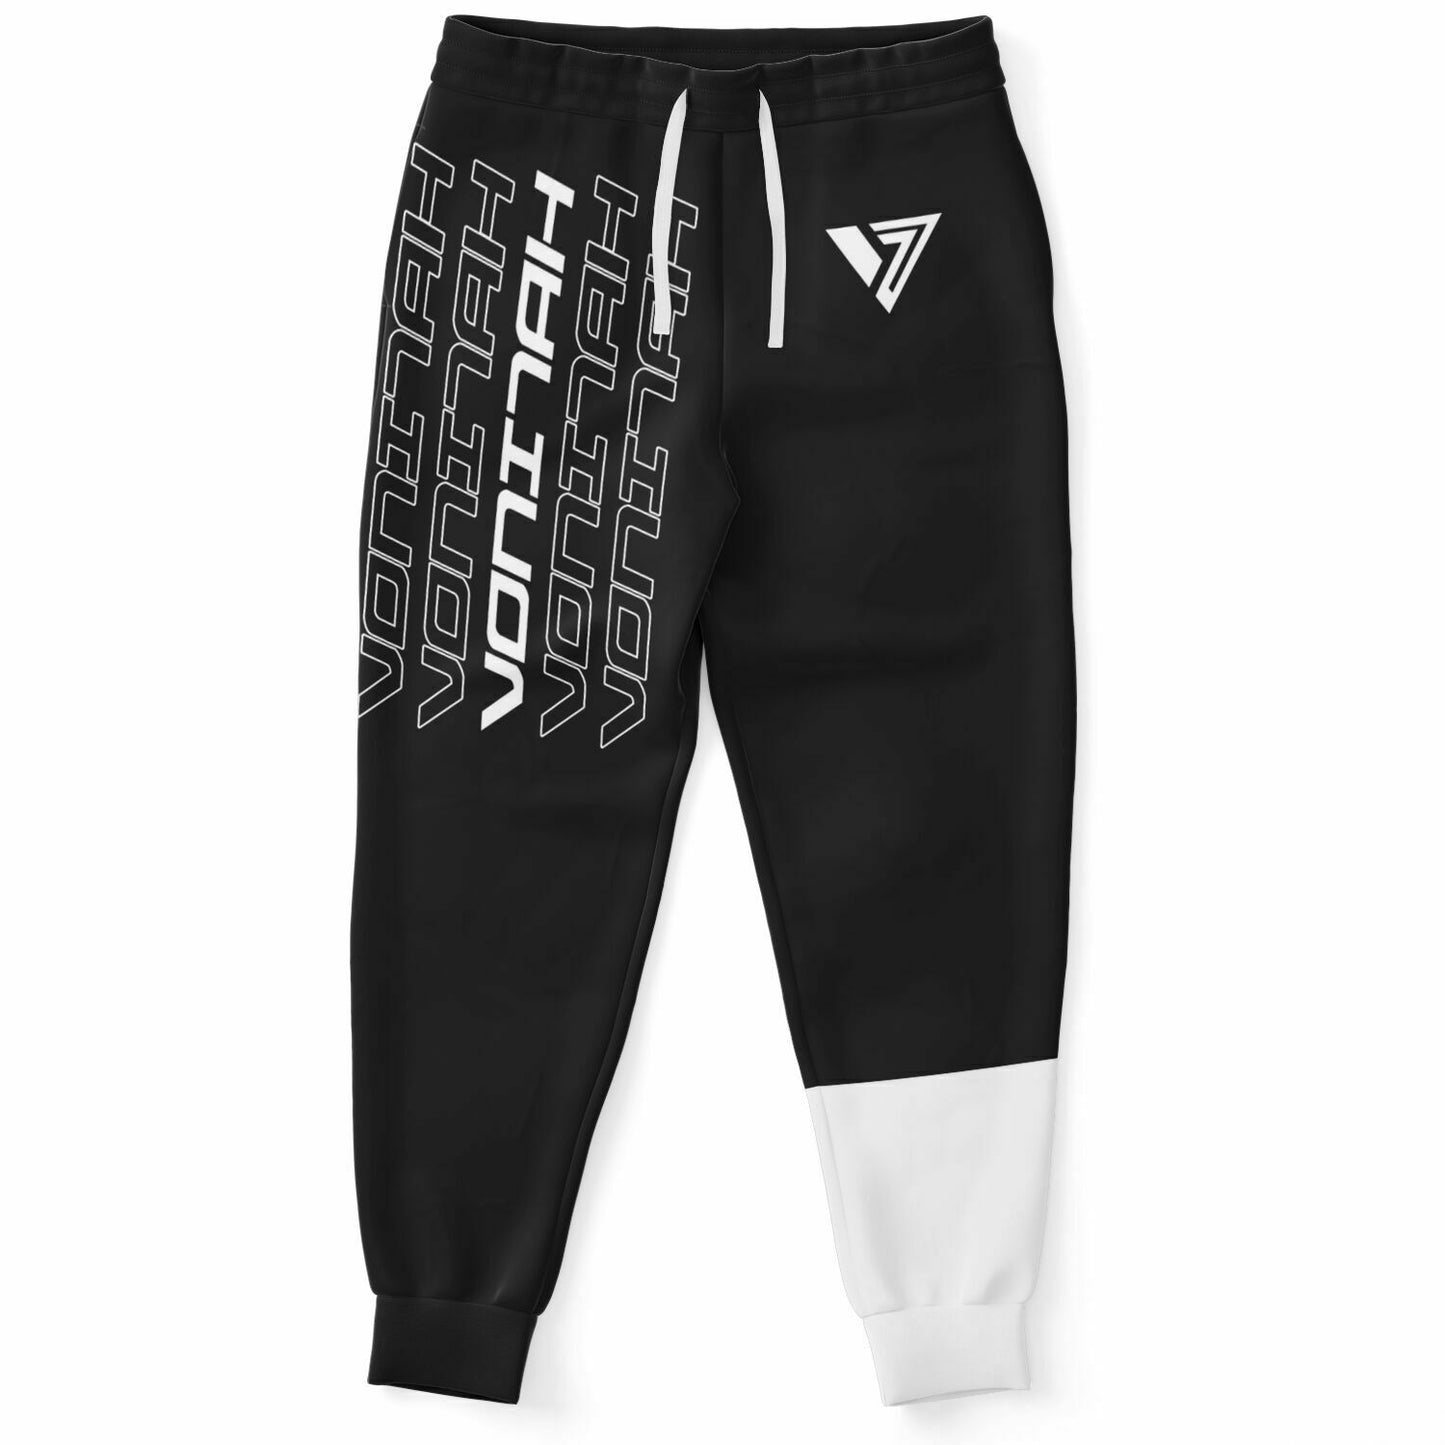 Vonitah All Over Print Fashion Joggers